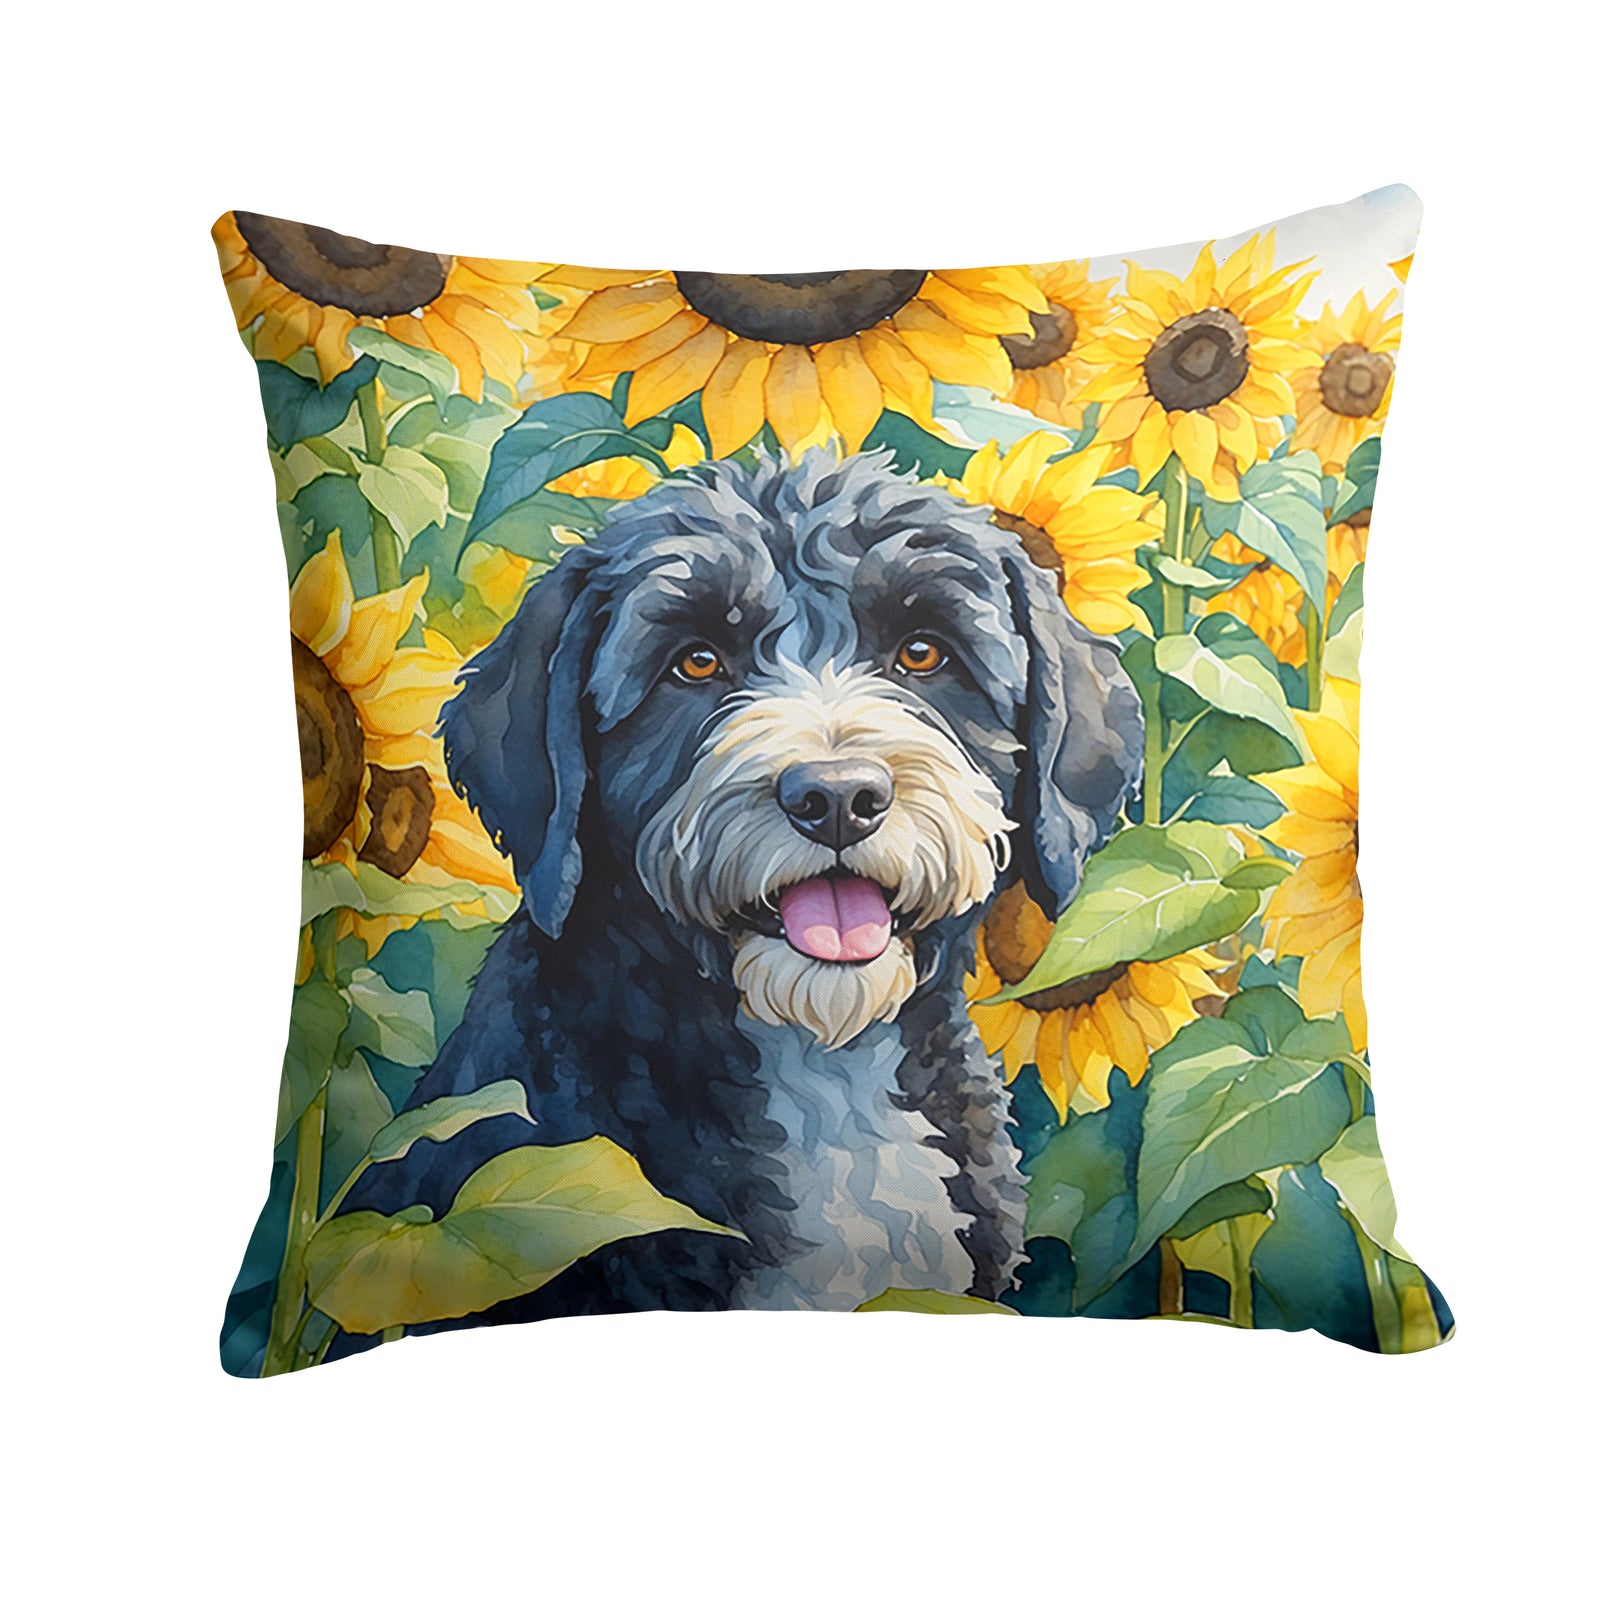 Buy this Portuguese Water Dog in Sunflowers Throw Pillow